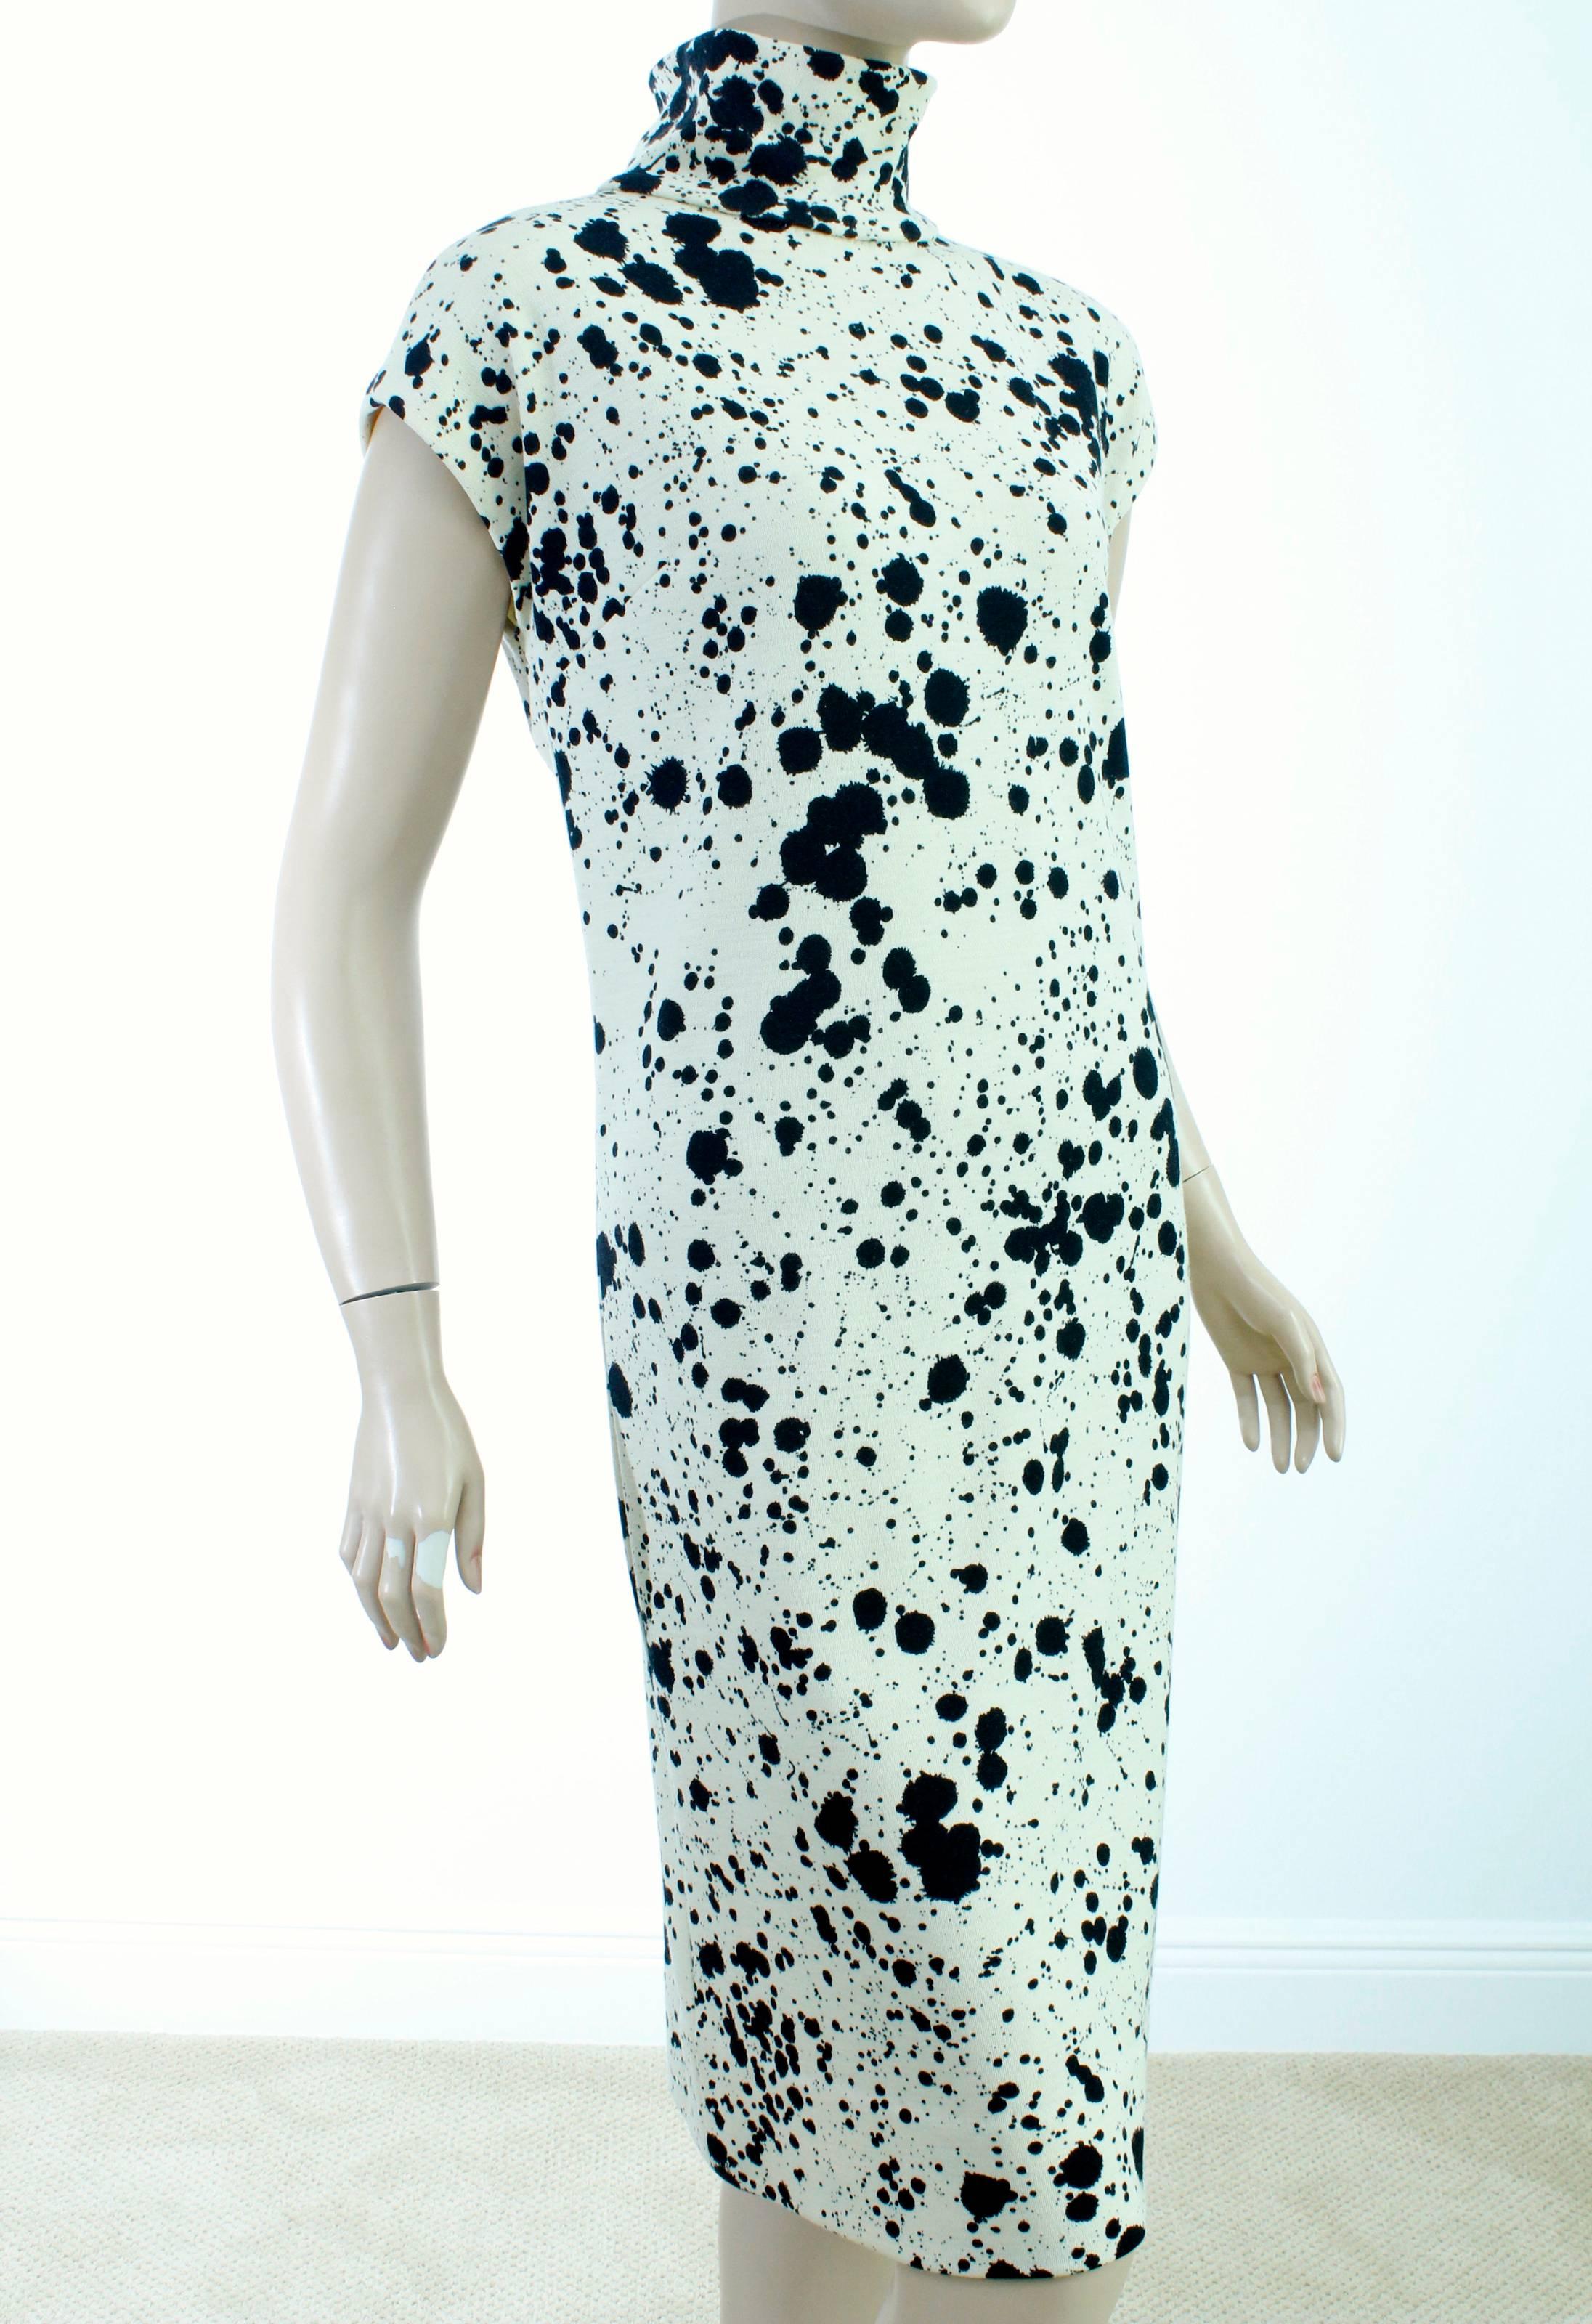 Here's an incredible vintage piece by the mother of modern American sportswear, Bonnie Cashin. Created in the late 70s, this wool dress is unlined and features a black paint spatter pattern against its cream white background. There's a photo of this